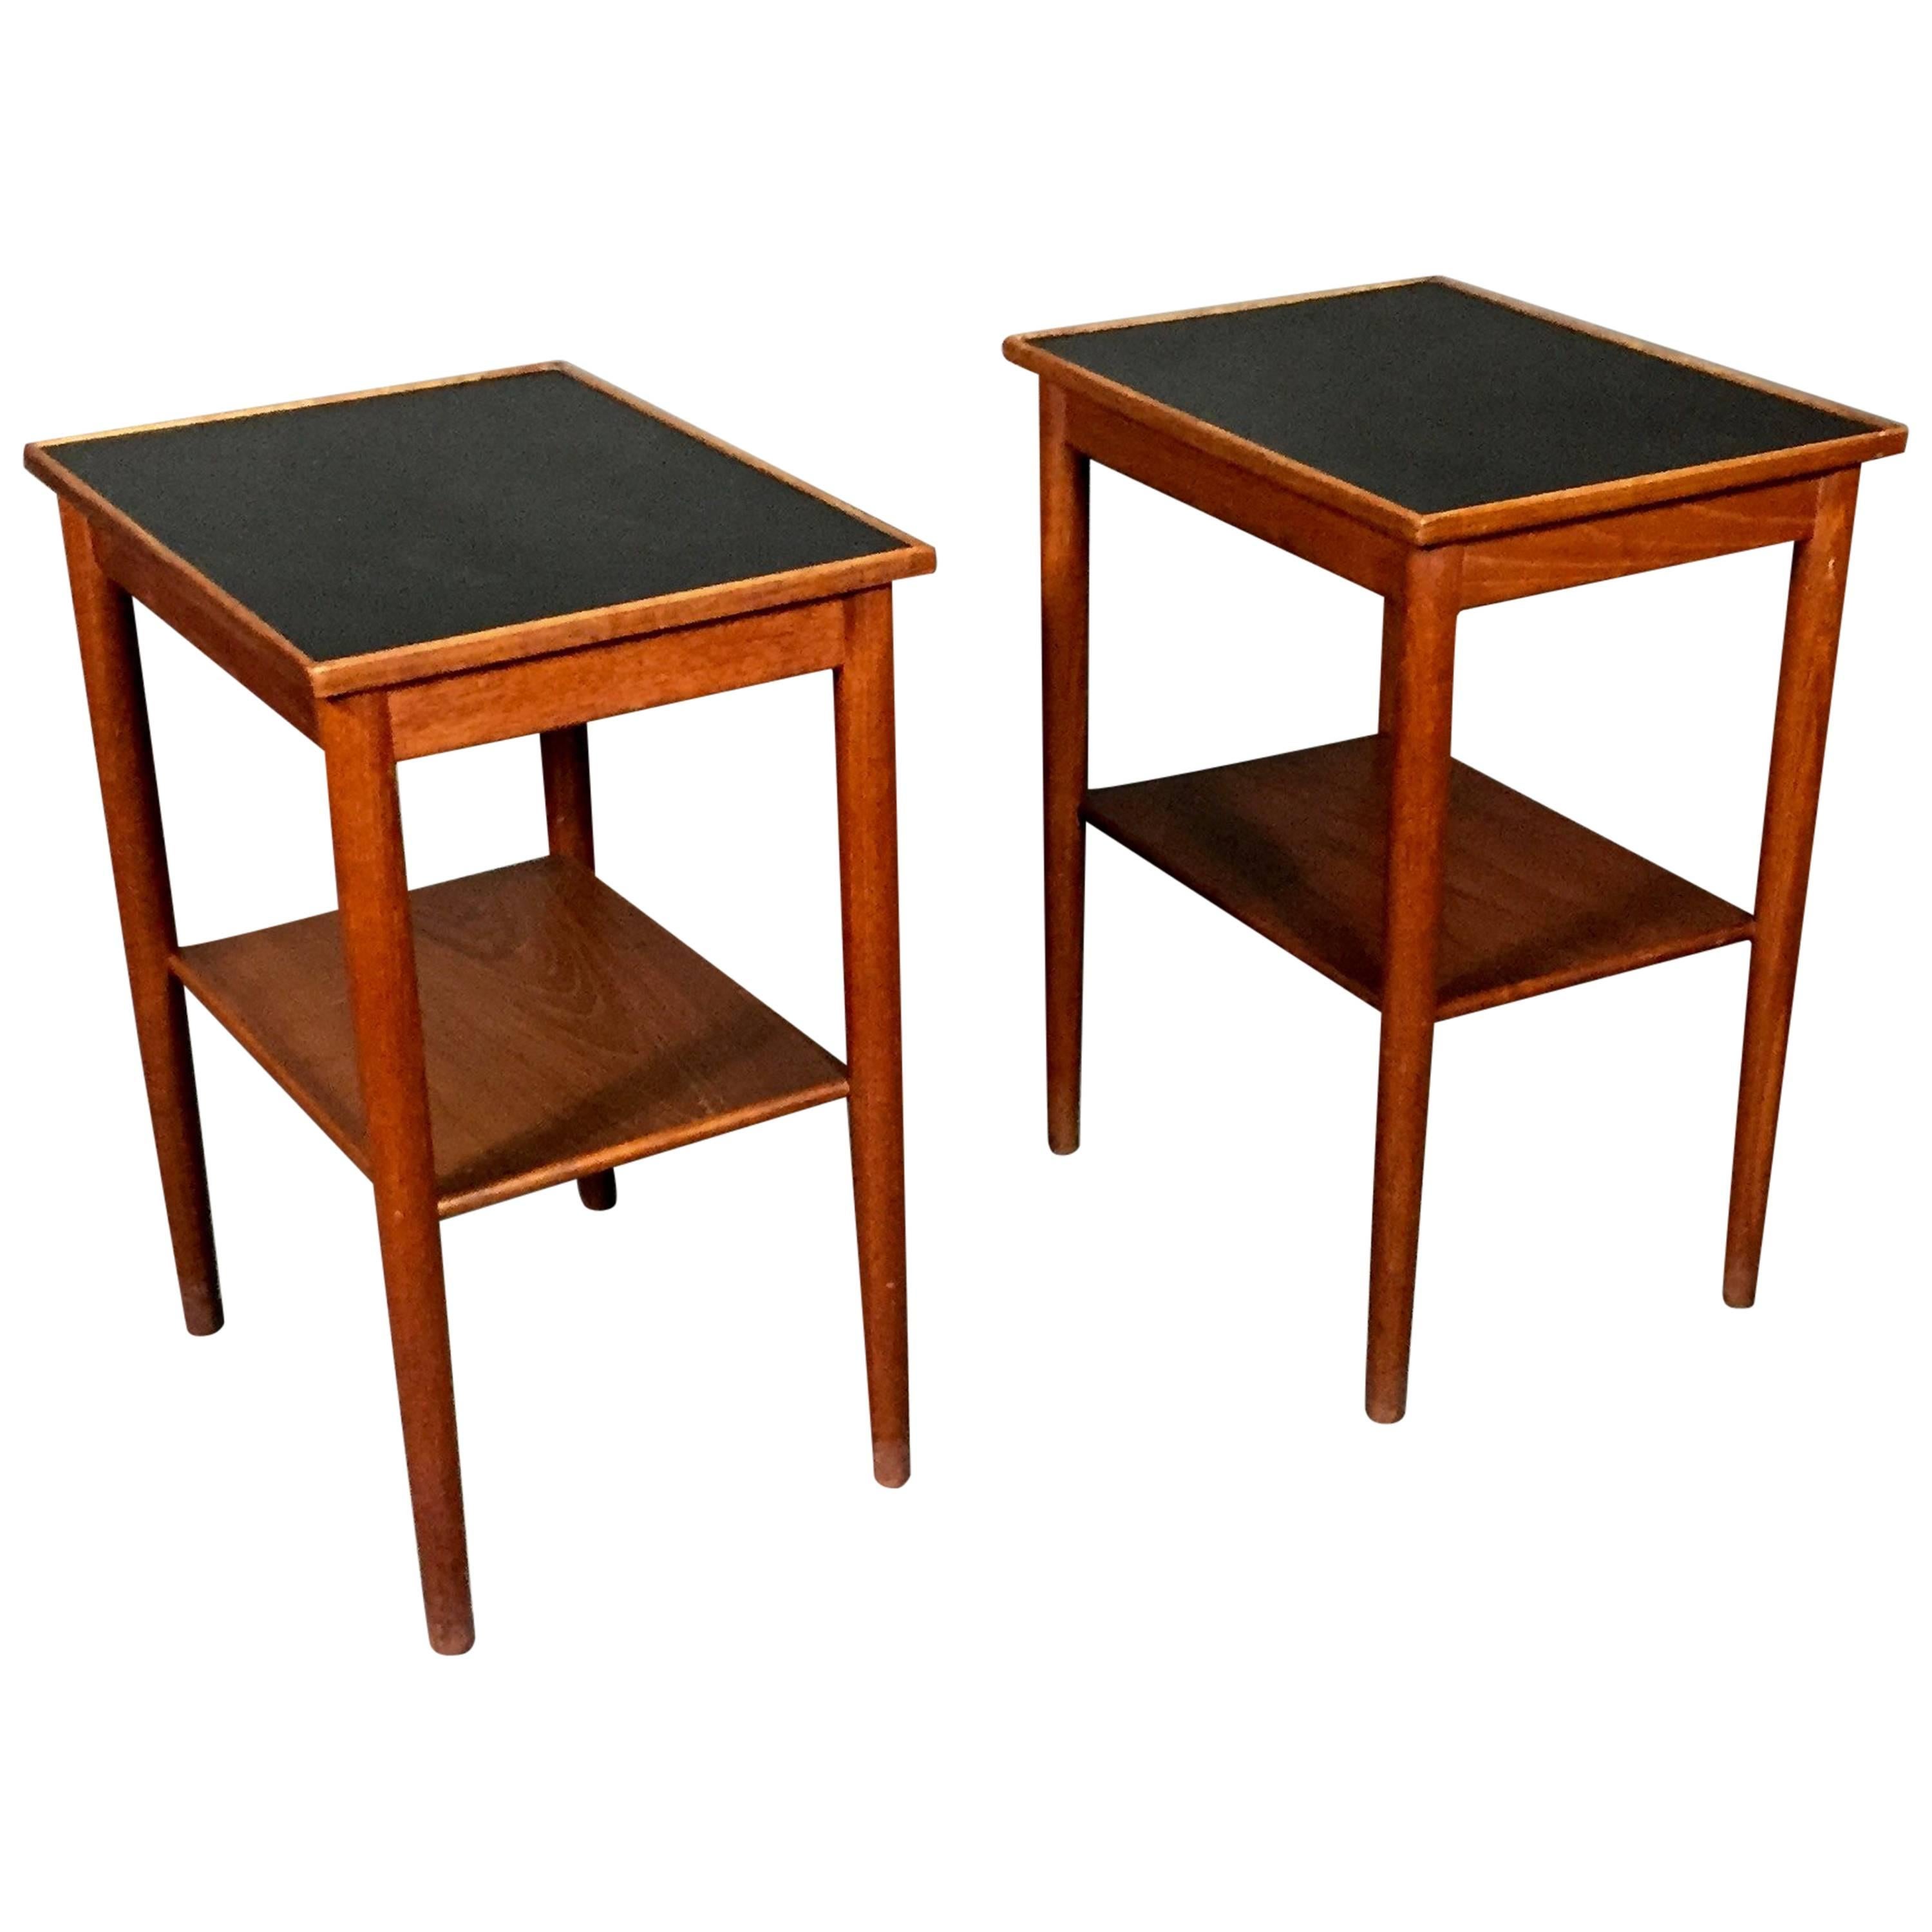 Pair of Scandinavian Teak and Black Formica End Tables, 1970s